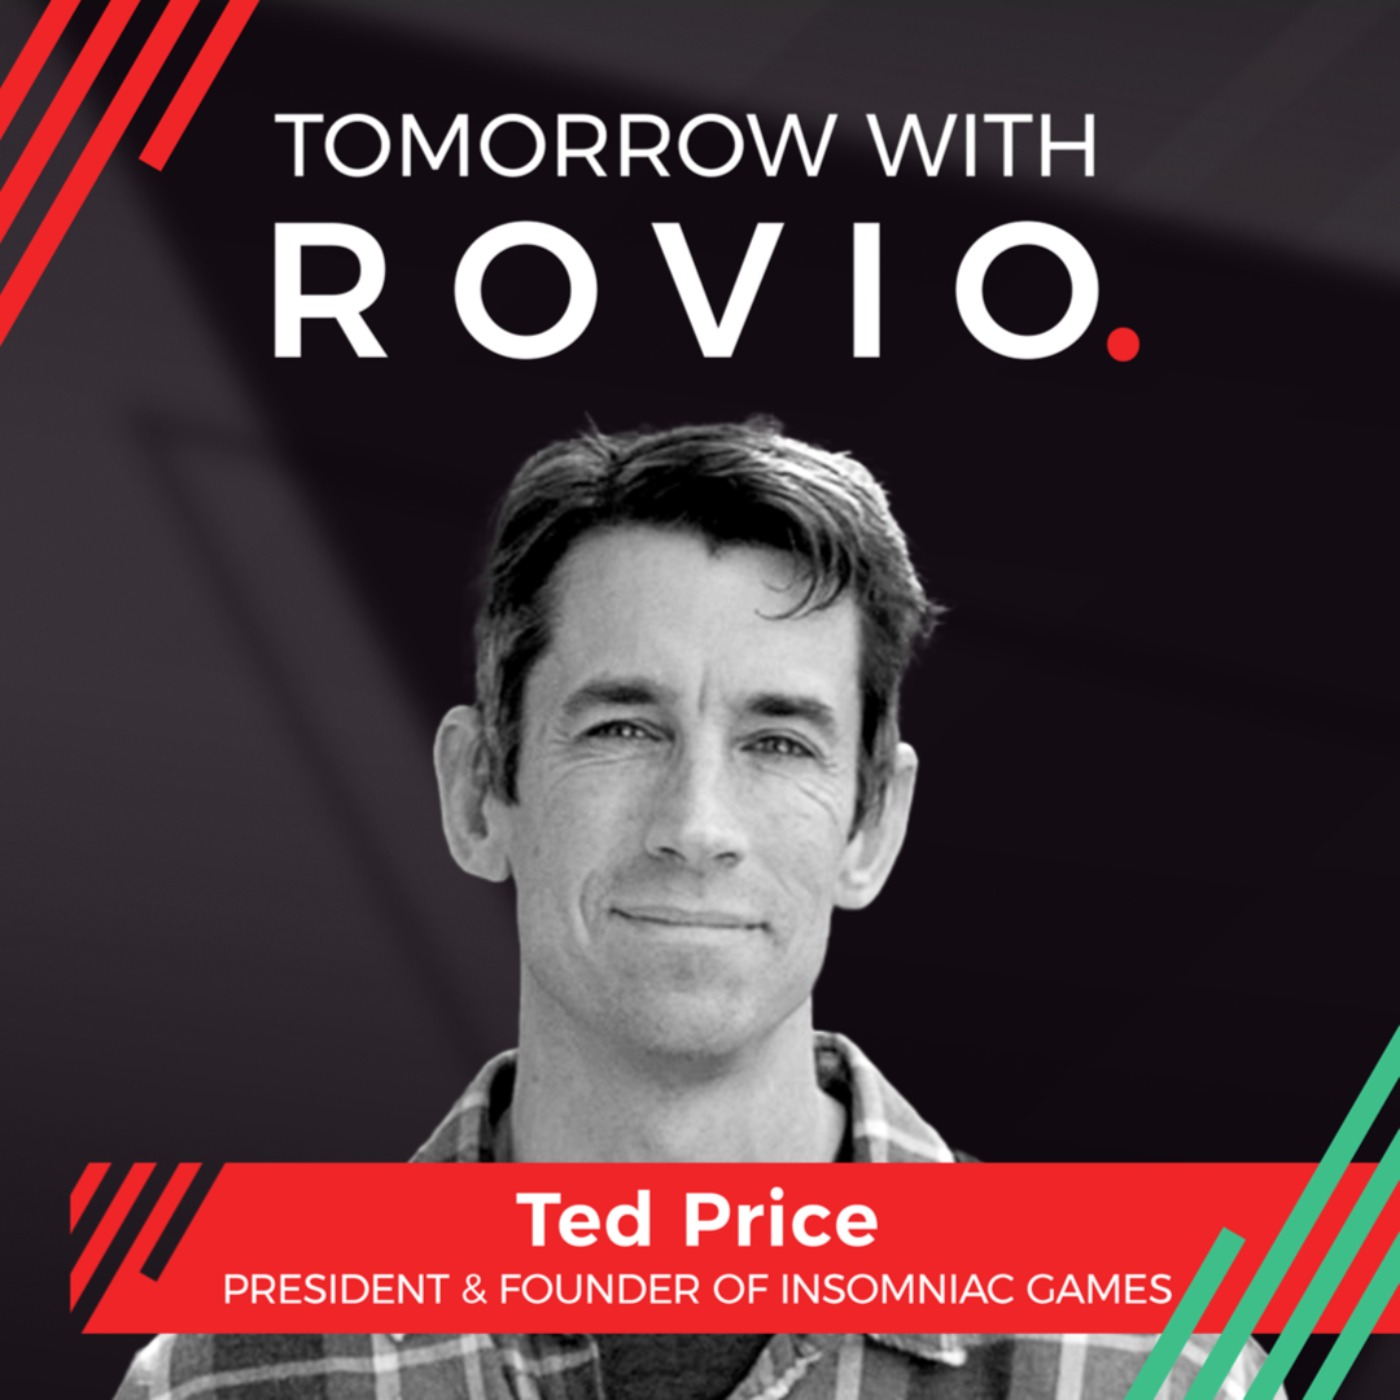 Ted Price - President of Insomniac Games - talks AAA game development